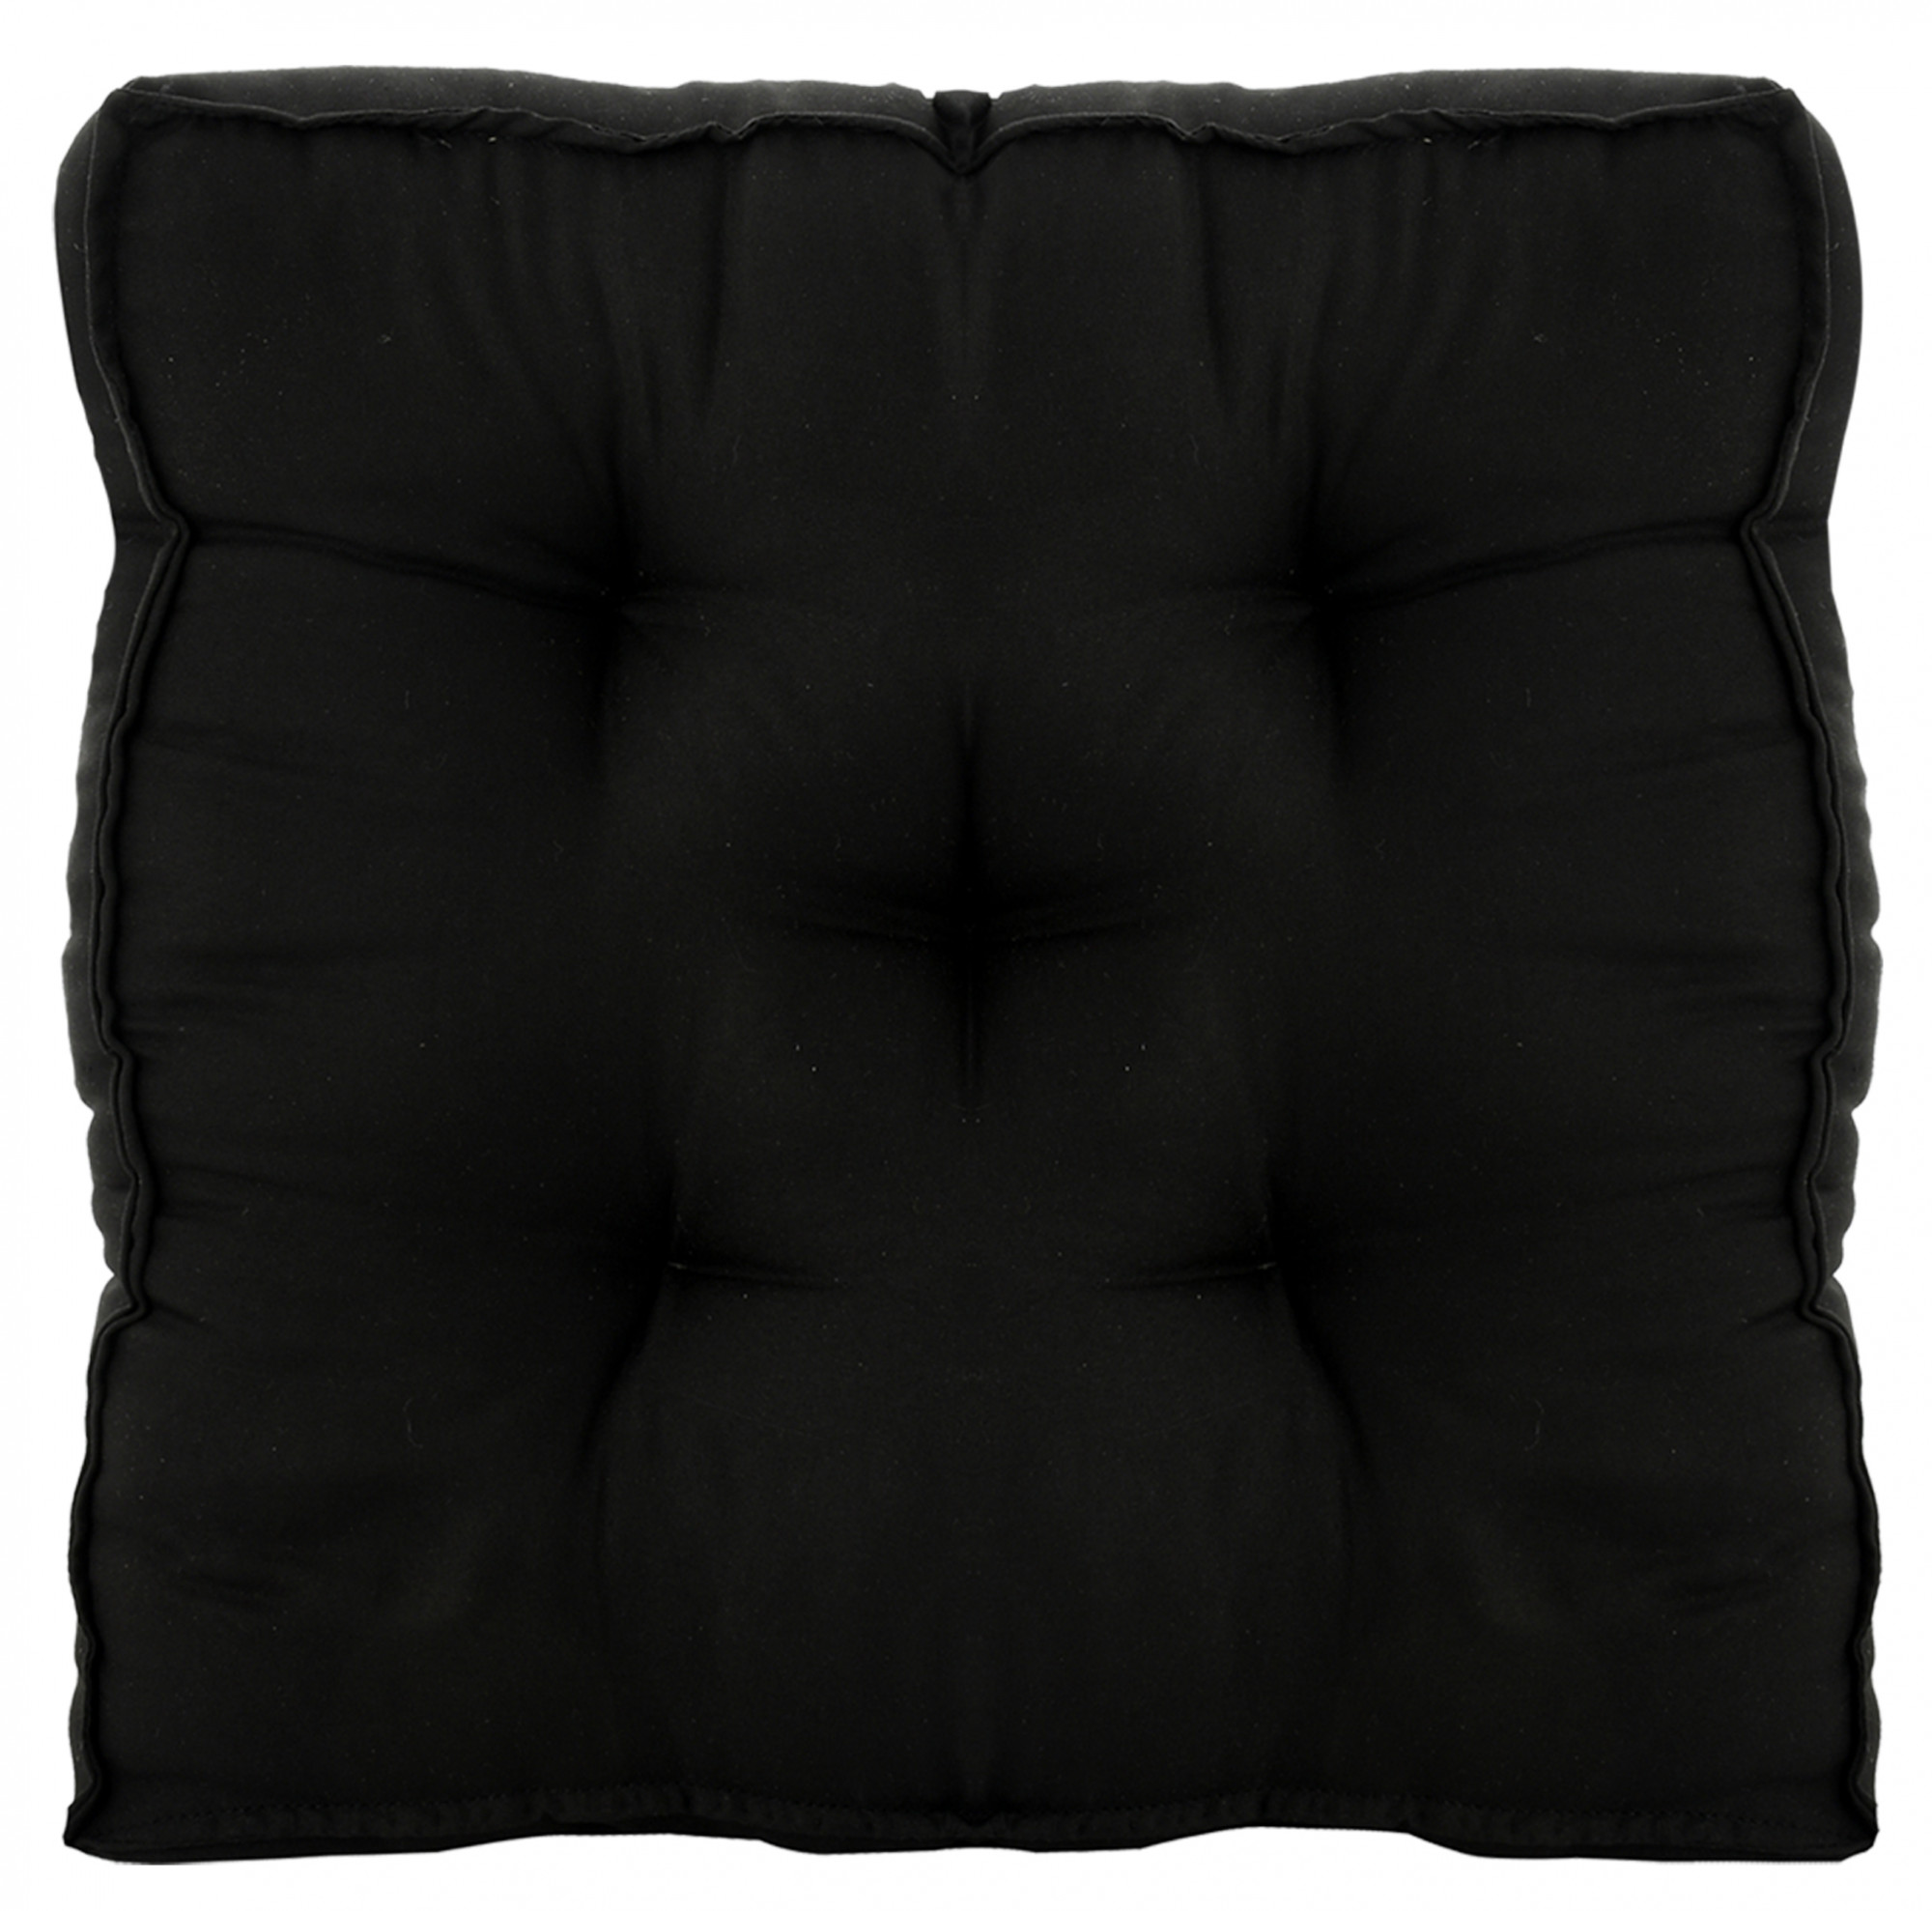 Kuber Industries Microfiber Square Chair Pad Seat Cushion For Car Pad, Office Chair, Indoor/Outdoor, Dining Living Room, Kitchen, 18*18 Inch (Black)